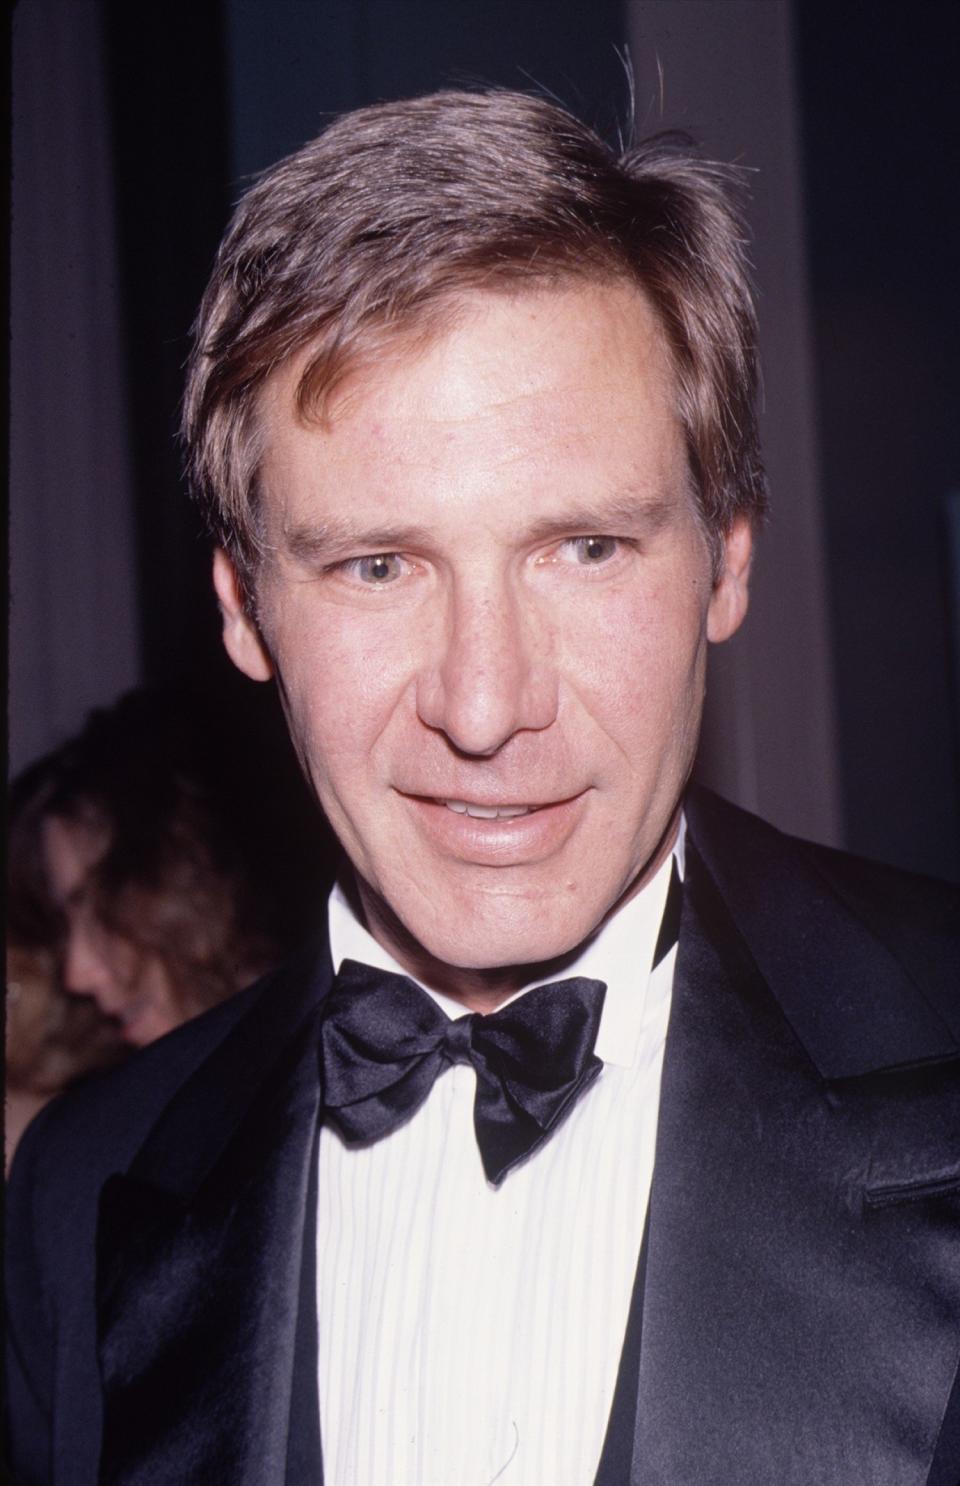 Despite the fact he didn't have any formal training, Mr. Indiana Jones was a carpenter before becoming a household name. He picked up the craft in Los Angeles in the late '60s, building furniture for the likes of Richard Dreyfuss, John Gregory Dunne and Joan Didion, Valerie Harper and Ray Manzarek.